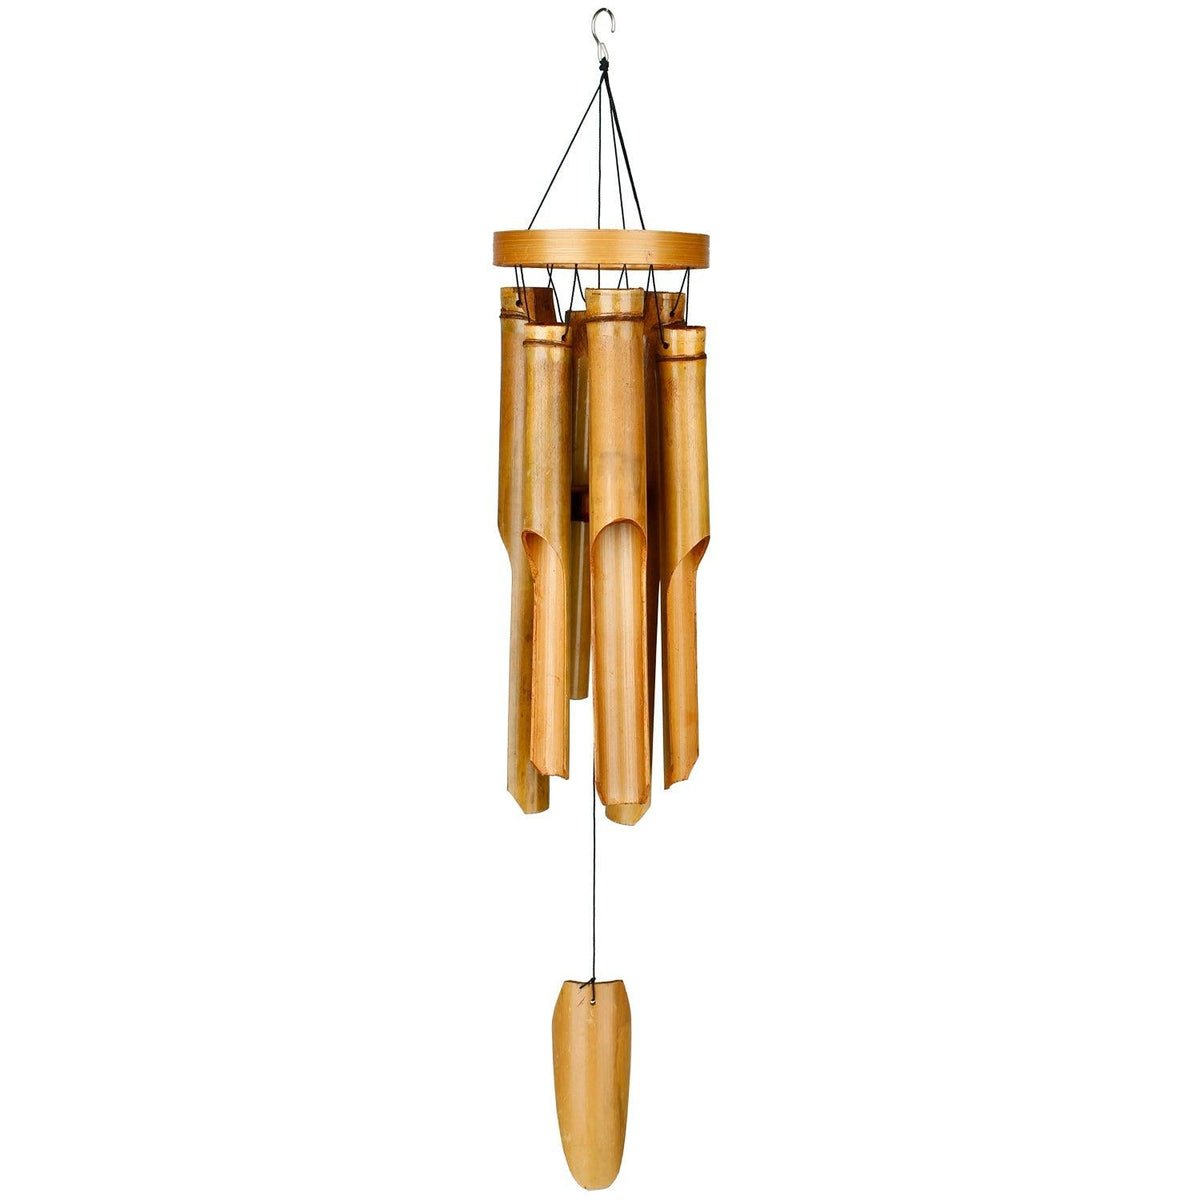 Bring a touch of tranquility to your outdoor space with this natural bamboo chime. Its gentle melodies will create a serene atmosphere while the bamboo top and six bamboo tubes add an earthy, natural element to your garden. Measuring at 37 inches long, it&#39;s a perfect addition to any outdoor oasis.